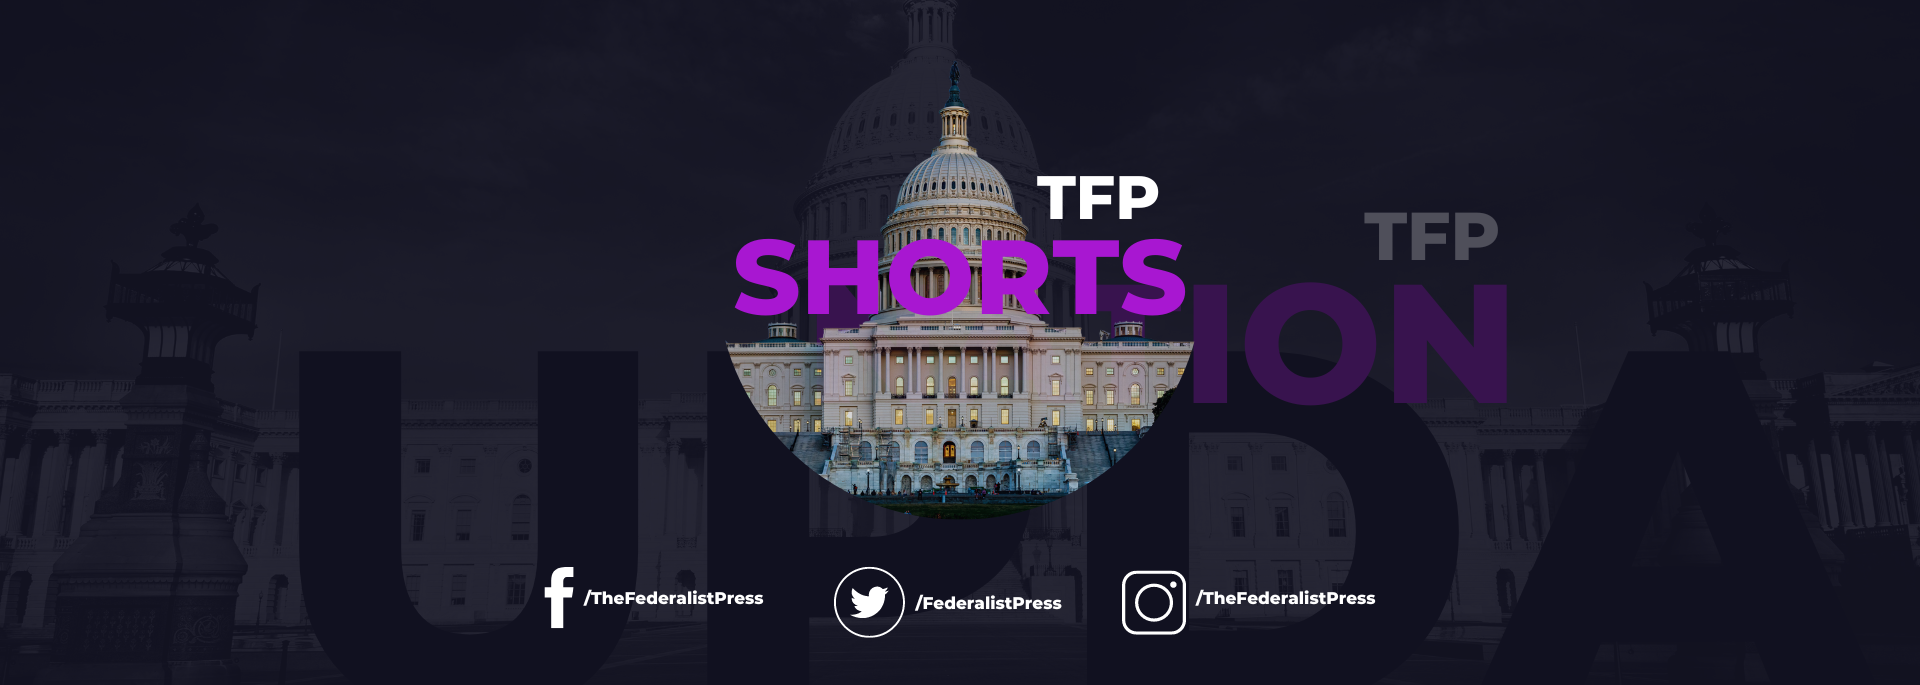 TFP Shorts channel